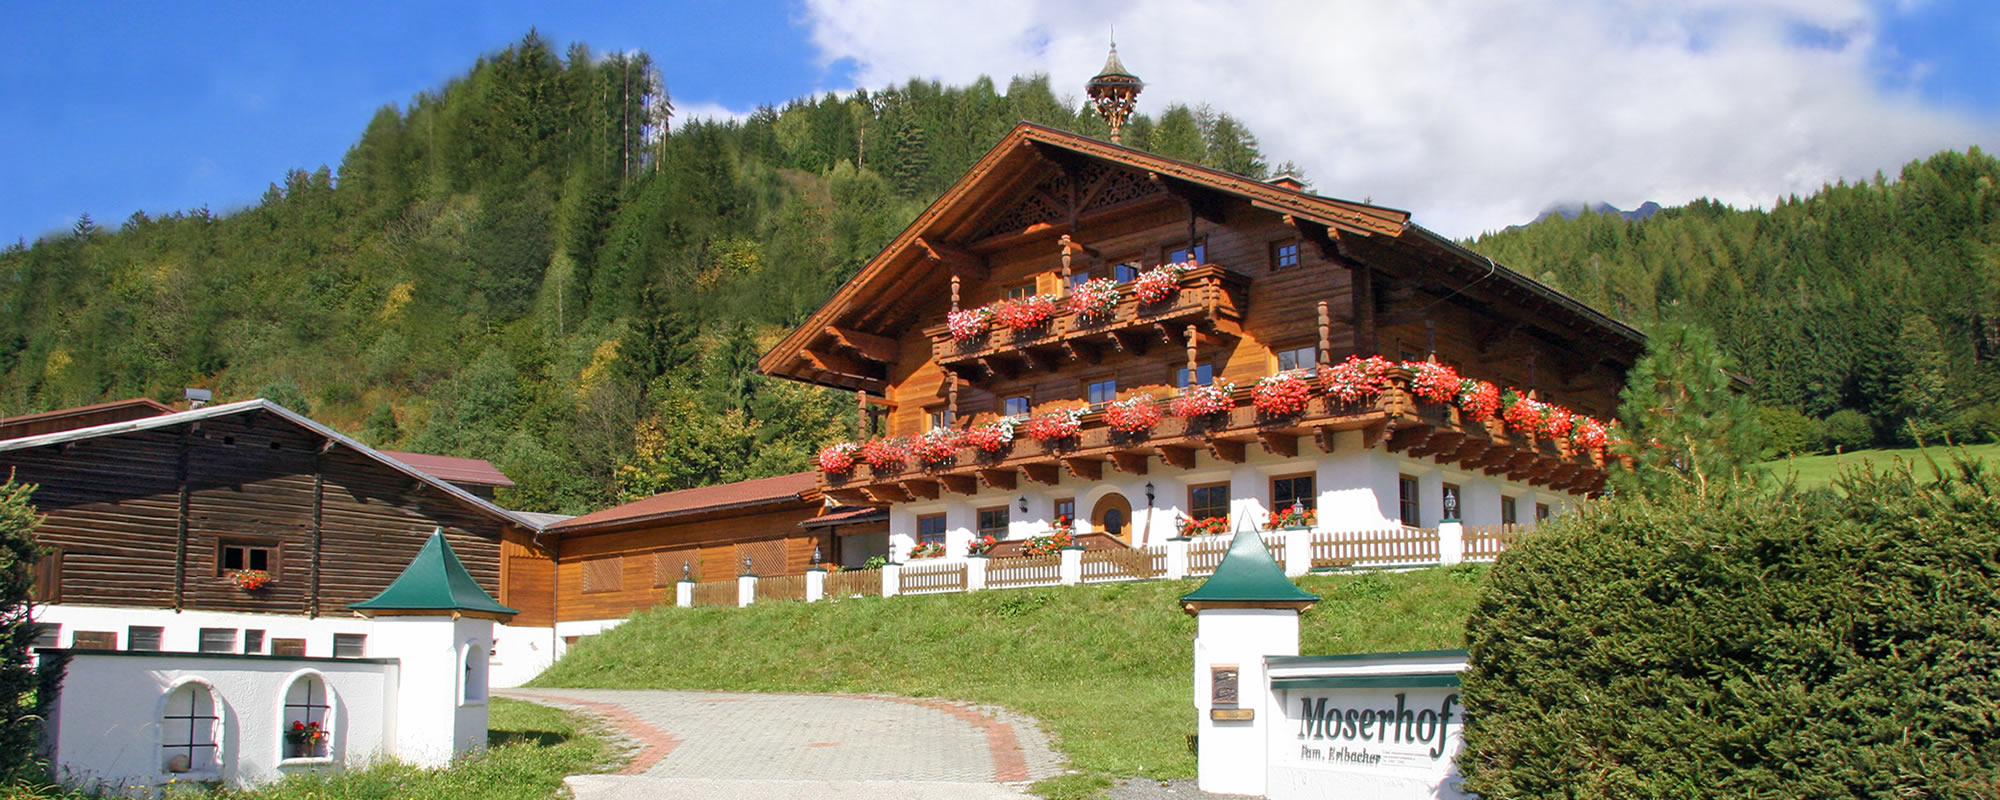 Appartements in Schladming am Moserhof